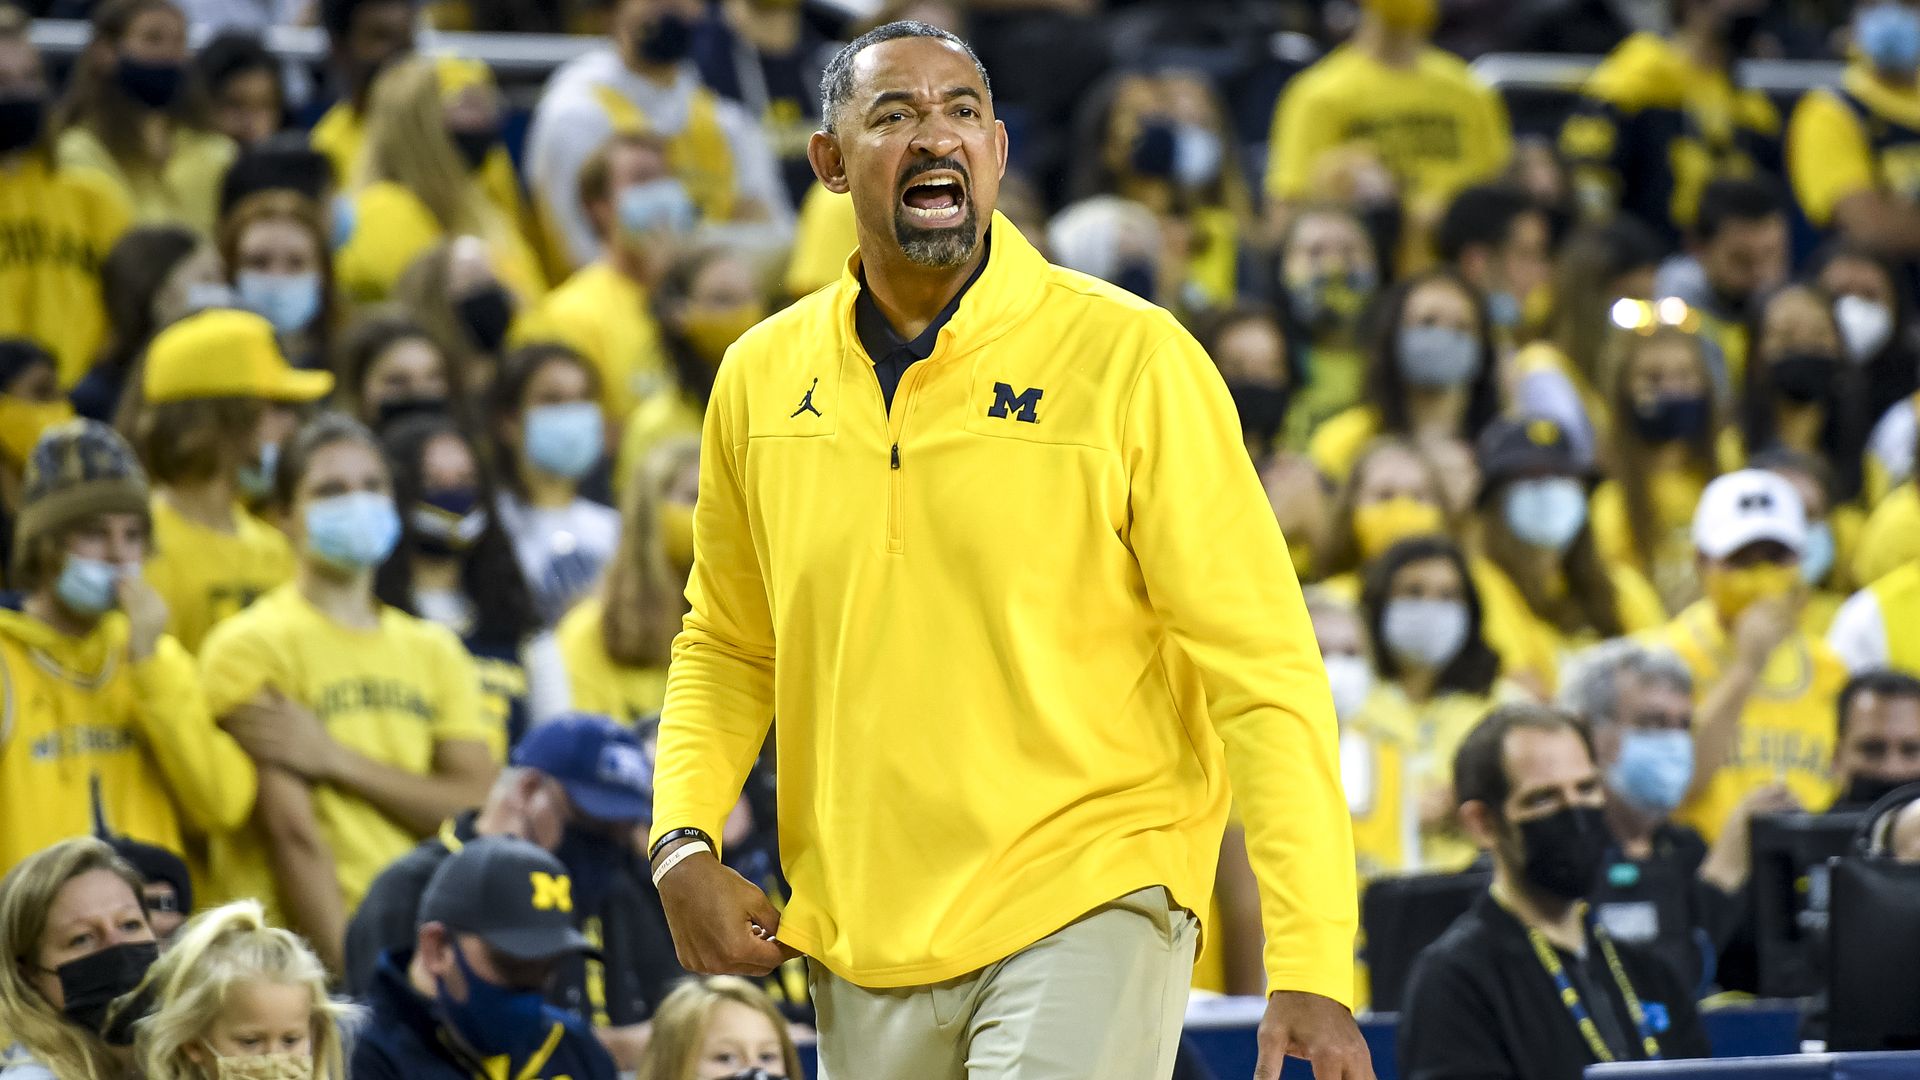 Head coach Juwan Howard of the Michigan Wolverines yells against the San Diego State Aztecs during the first half at Crisler Arena on December 04, 2021 in Ann Arbor, Michigan.